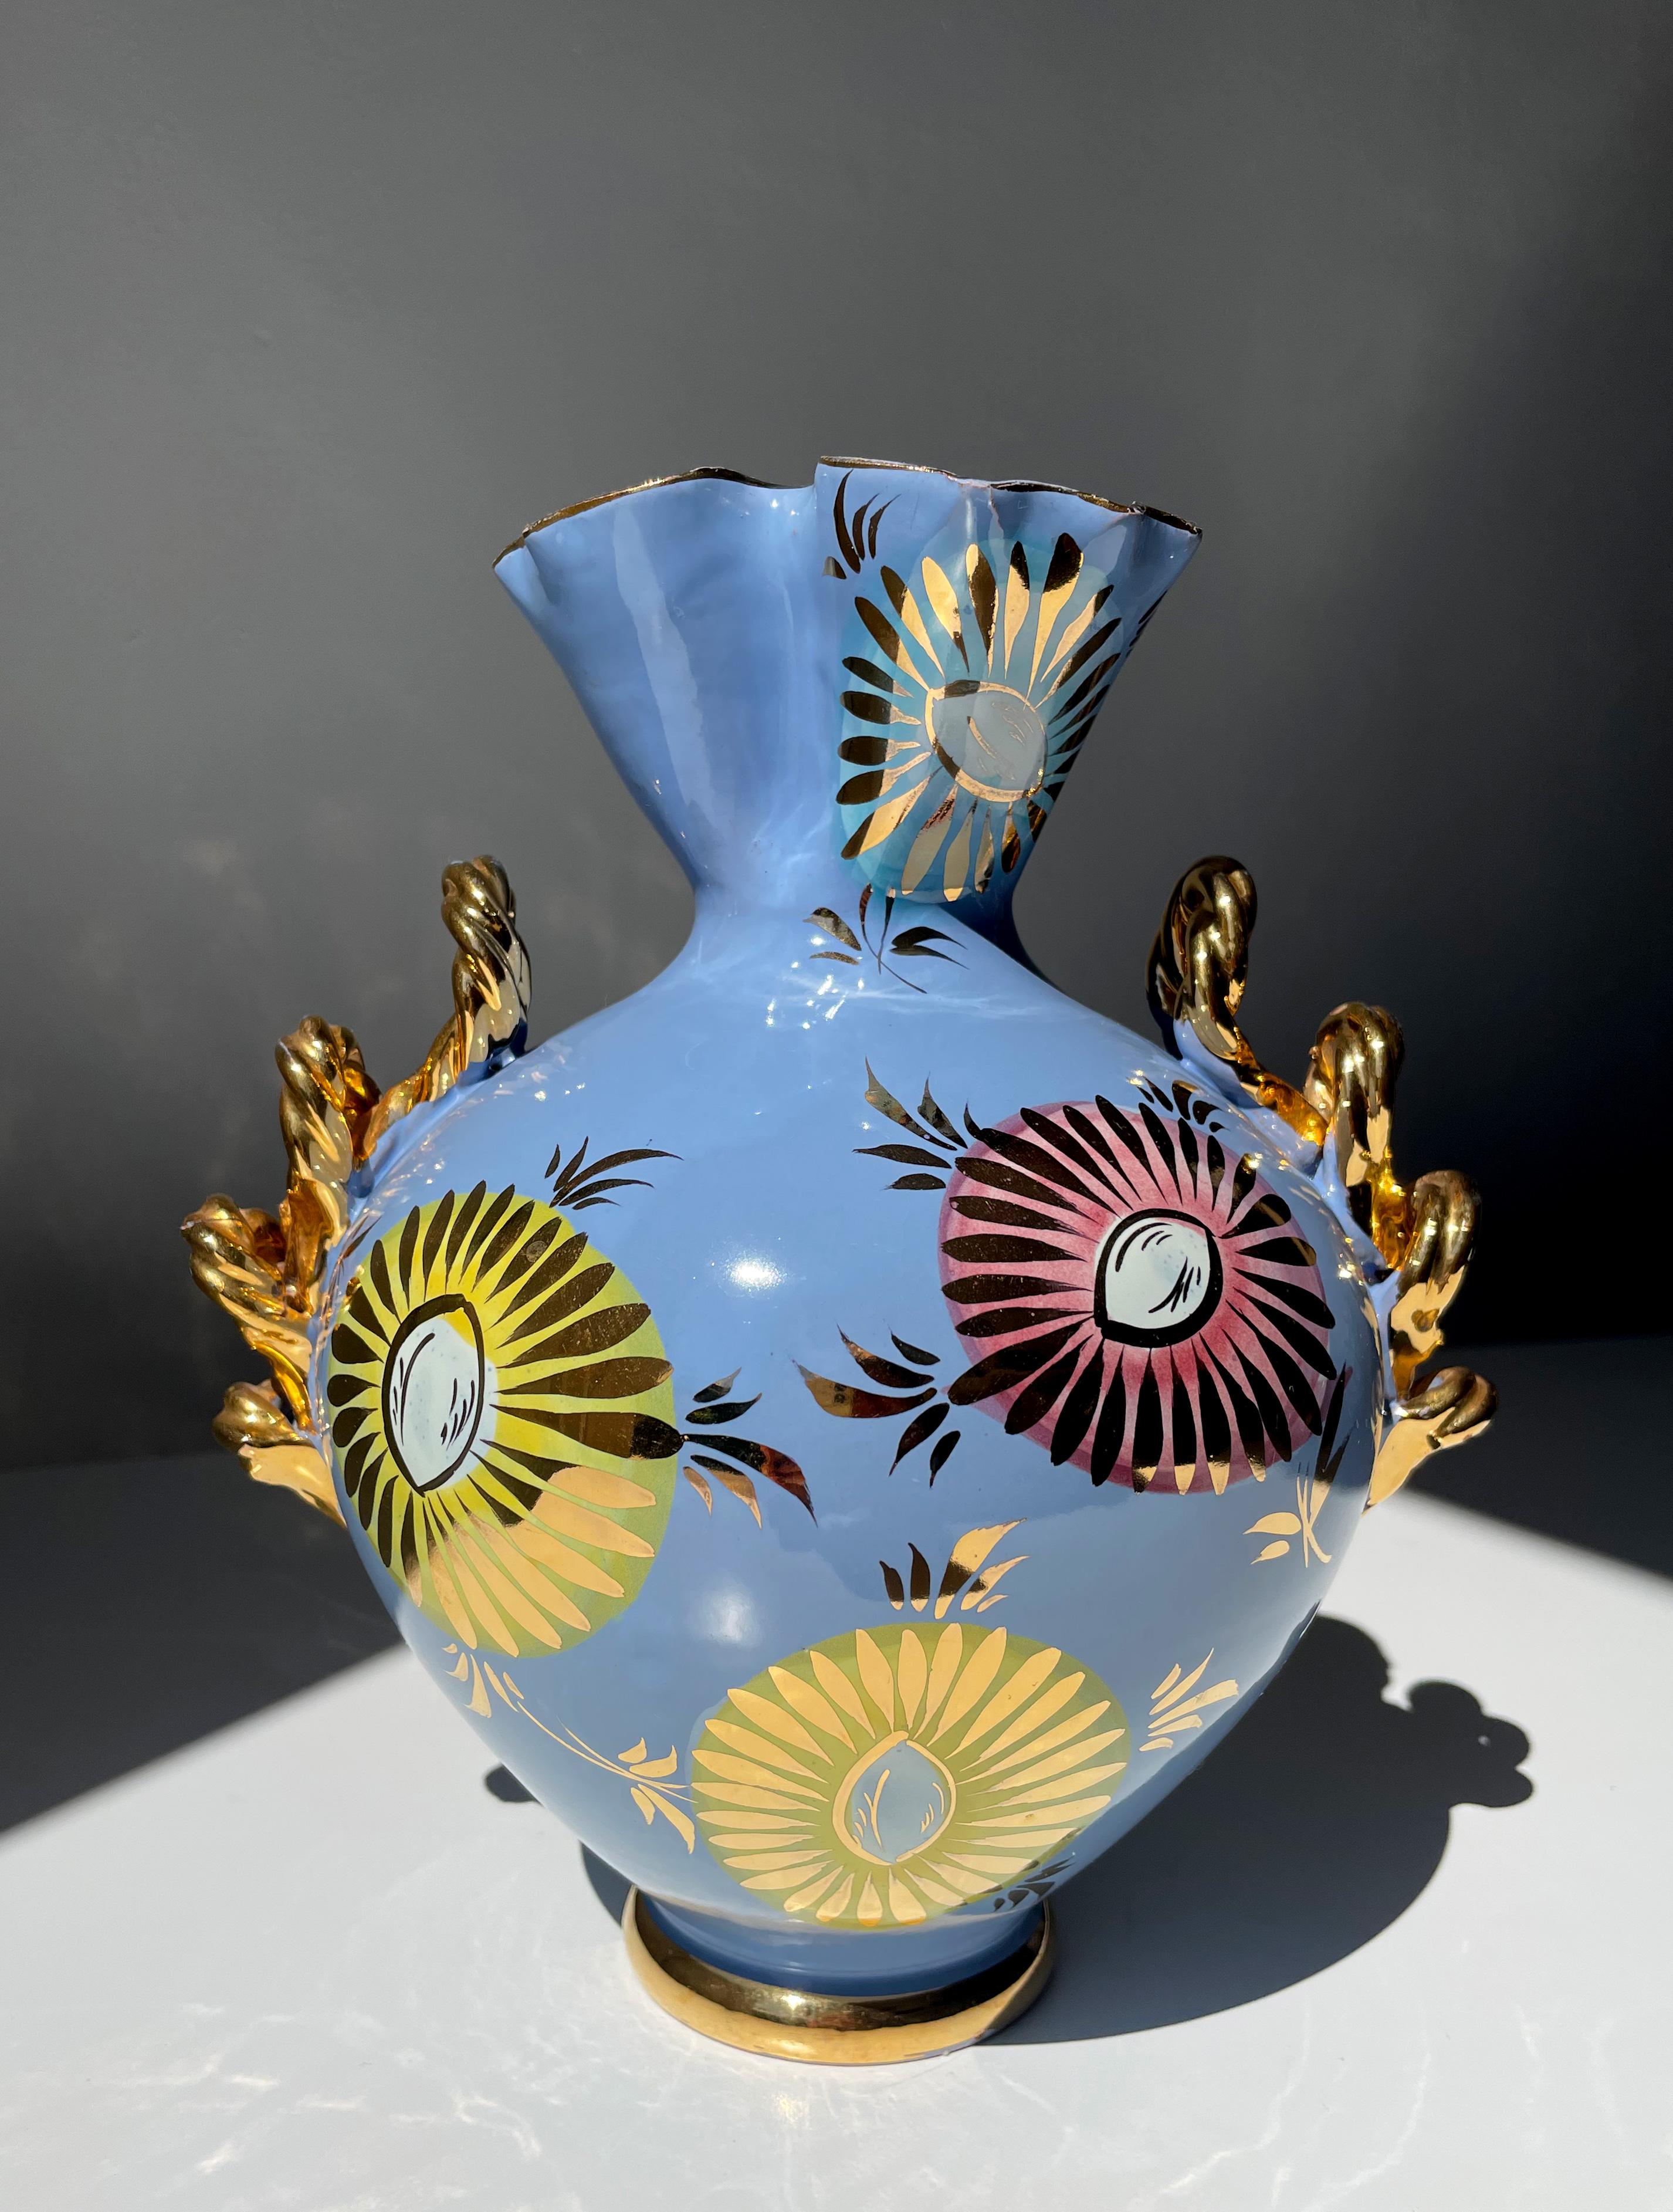 Organically shaped Italian midcentury porcelain vase manufactured by Studio Fiamma, Sesto Fiorentino in the 1950s. Glazed in a shiny light sky blue color and decorated by hand with large pastel colored flowers in yellow, rose and blue with golden